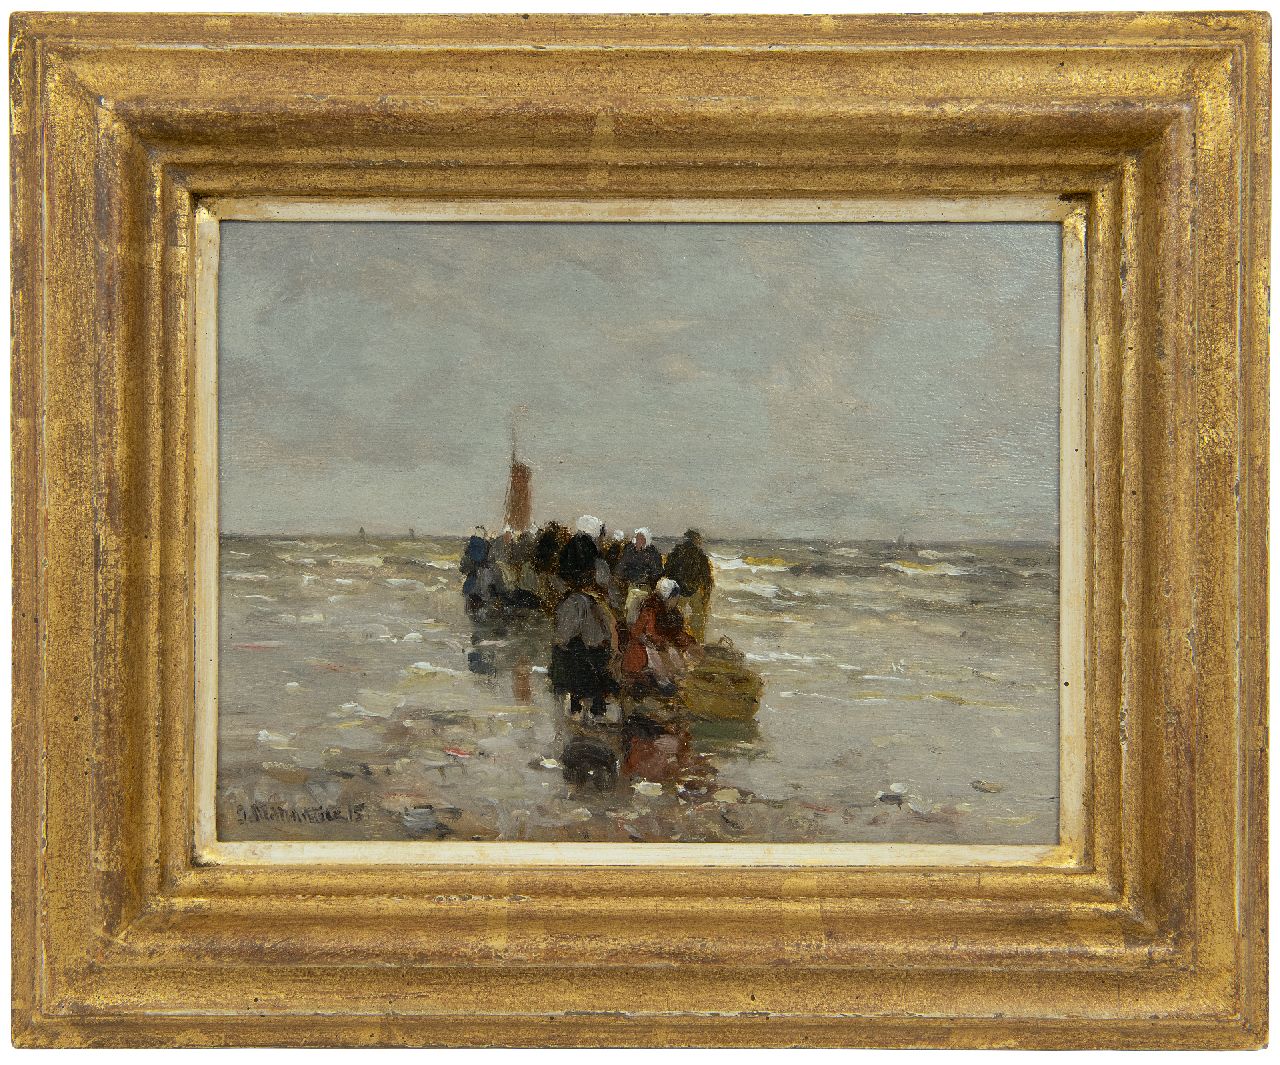 Munthe G.A.L.  | Gerhard Arij Ludwig 'Morgenstjerne' Munthe | Paintings offered for sale | Fishmongers waiting on the beach of Katwijk, oil on panel 16.0 x 21.0 cm, signed l.l. and dated '15